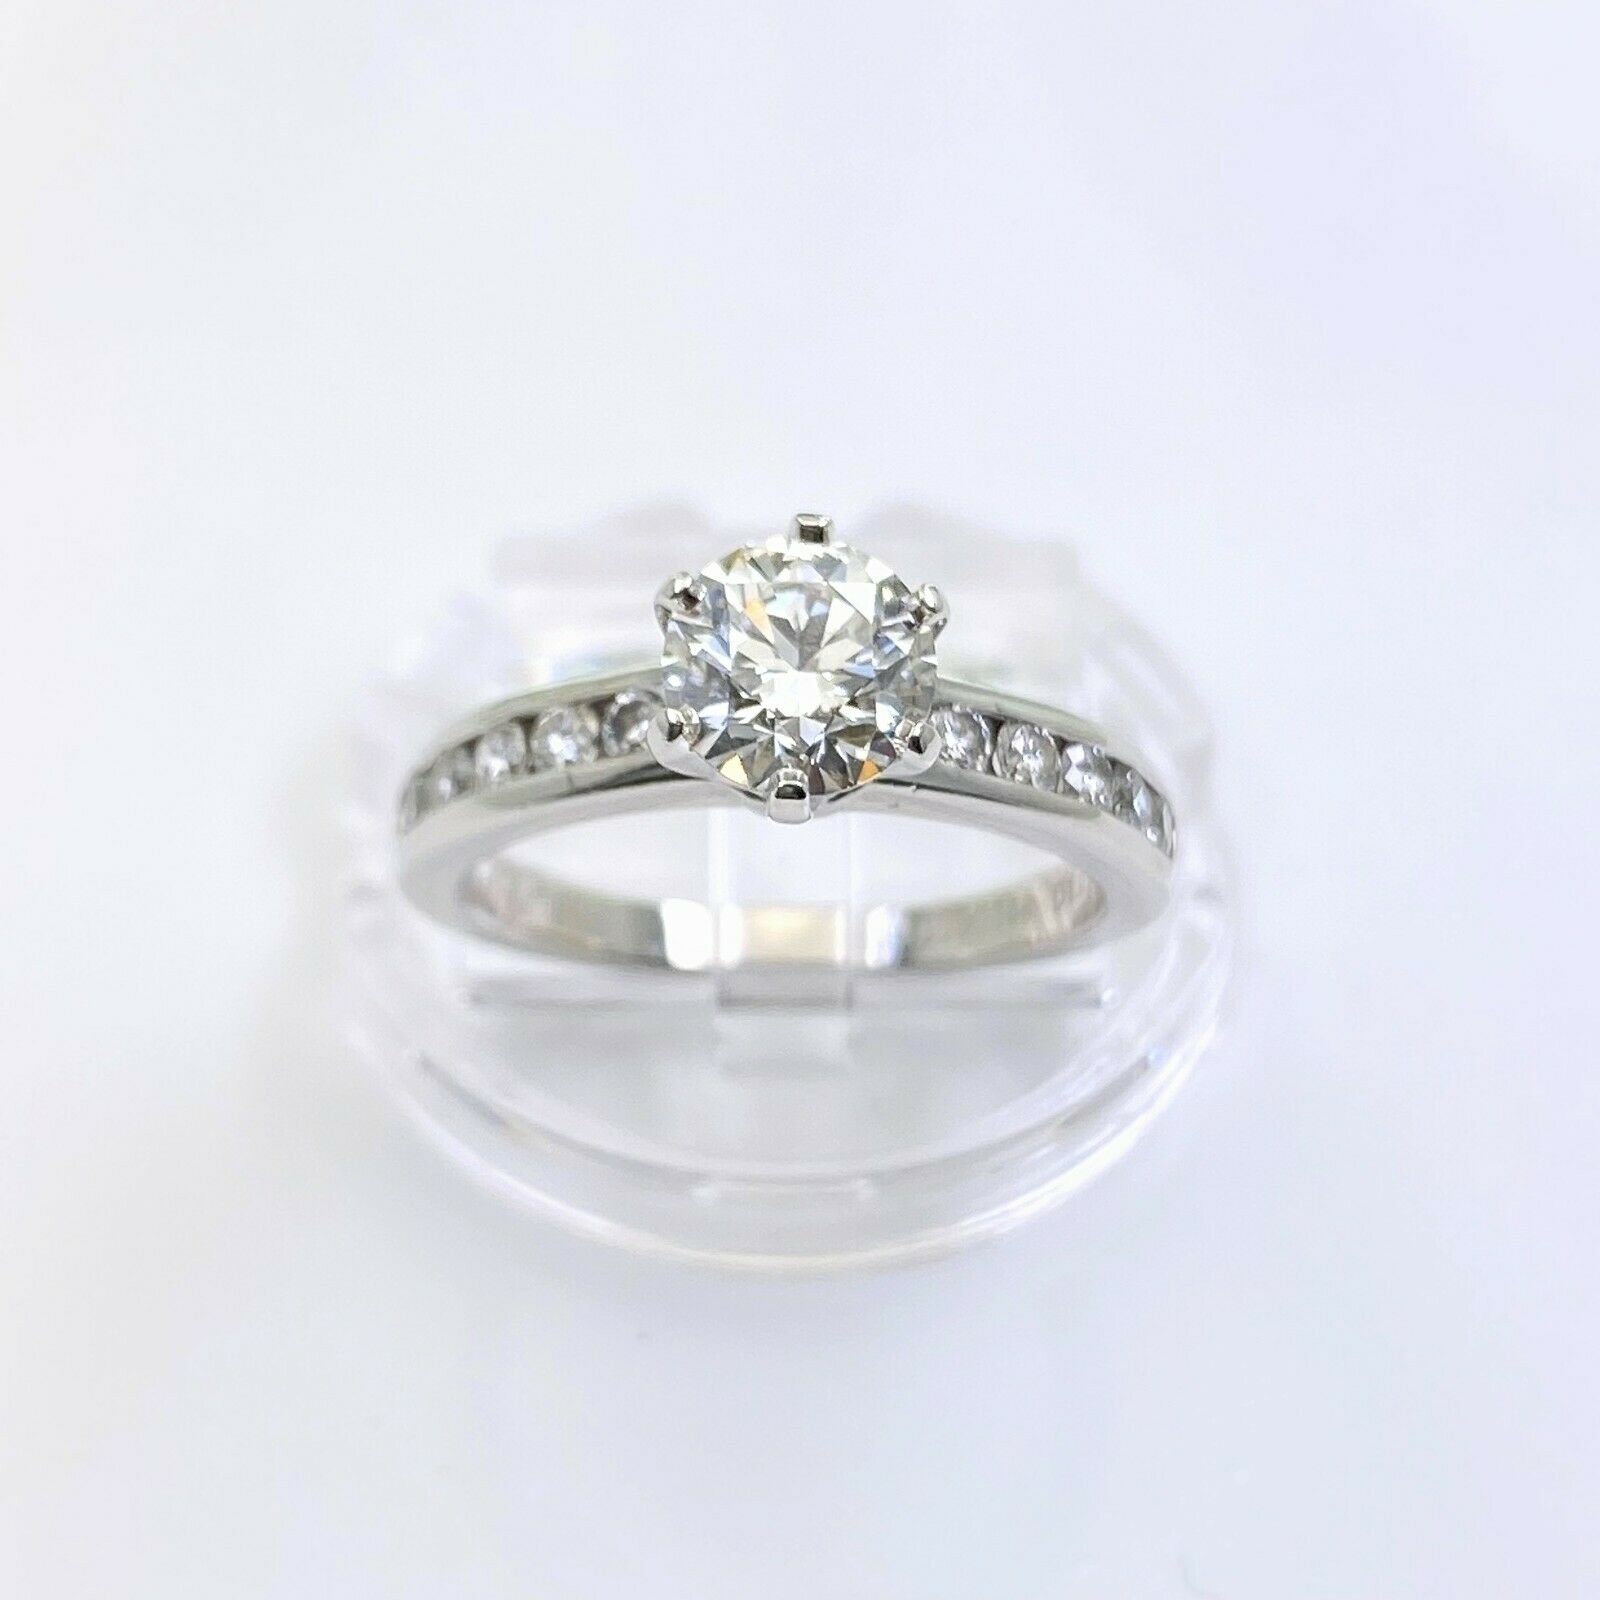 Tiffany & Co. Round Diamond 1.36 tcw Channel Set Band Engagement Ring